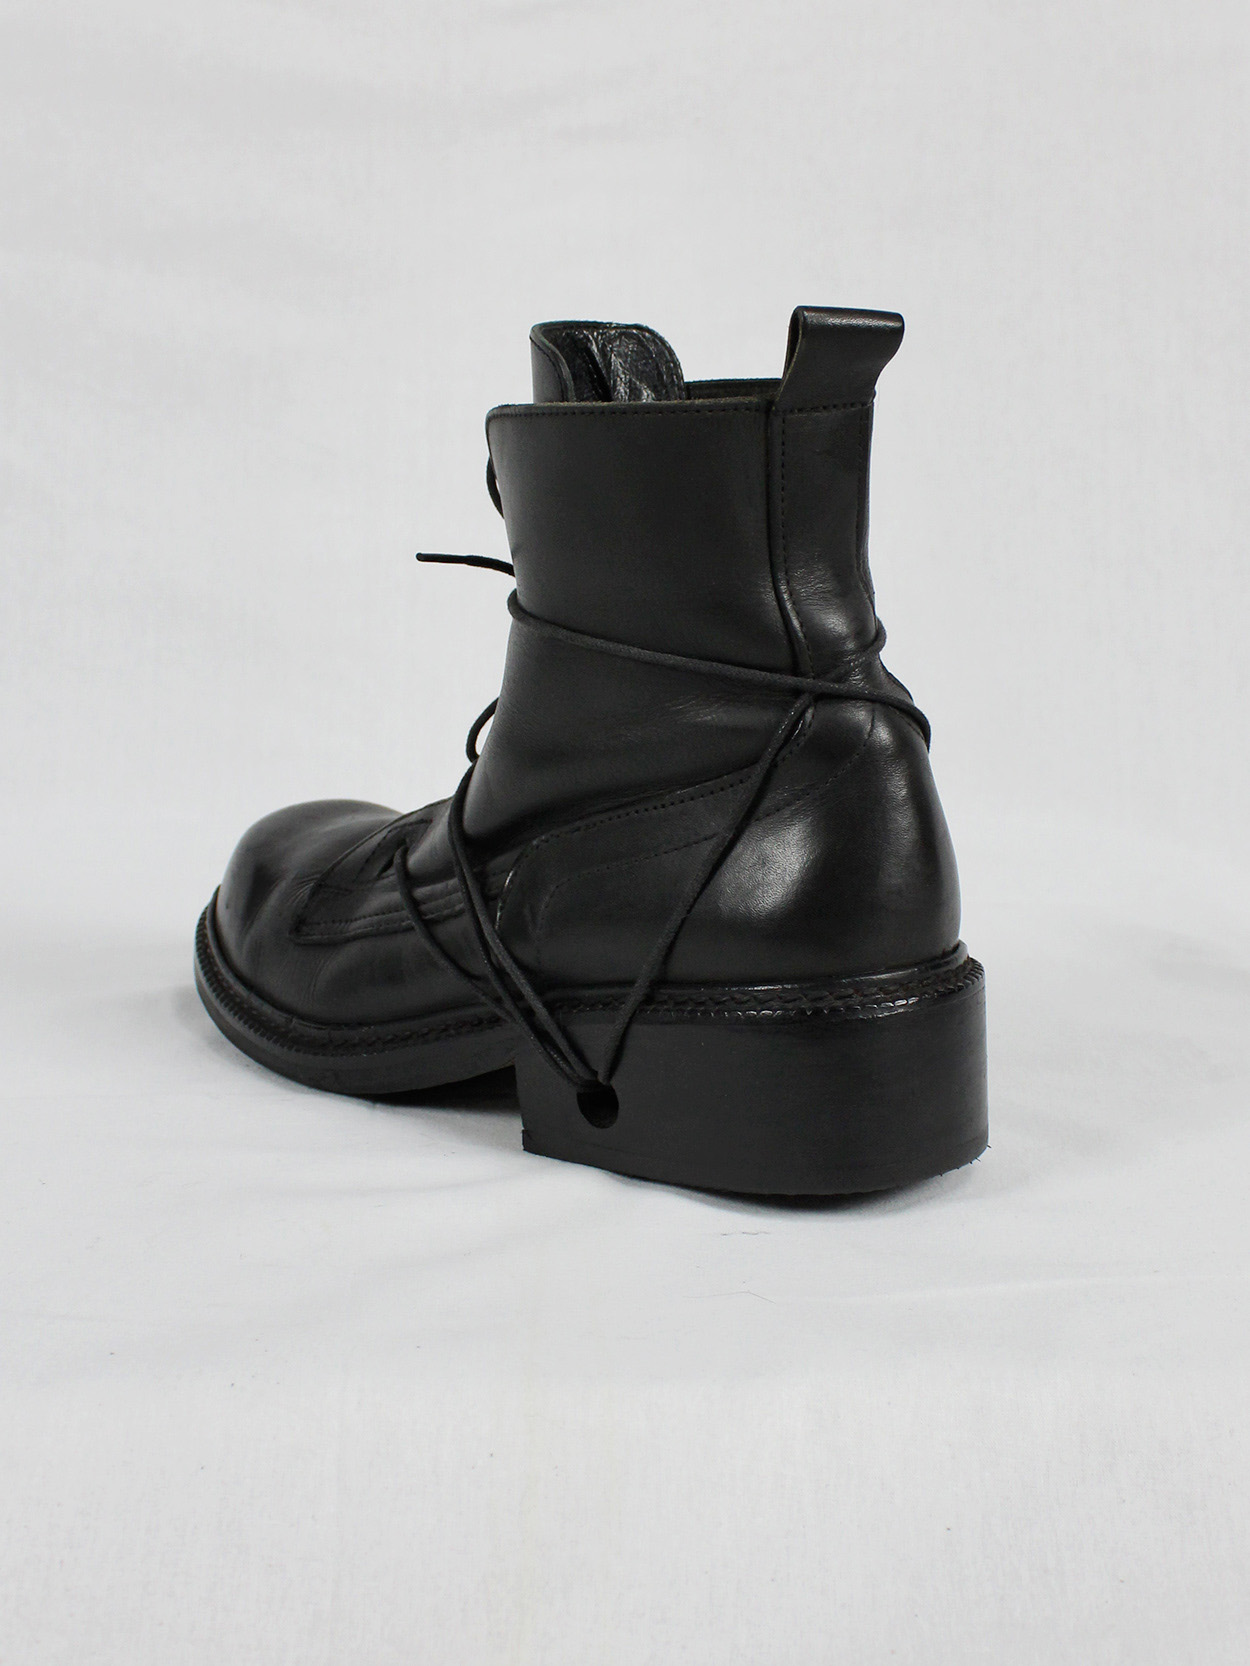 Dirk Bikkembergs black tall boots with laces through the soles (16)